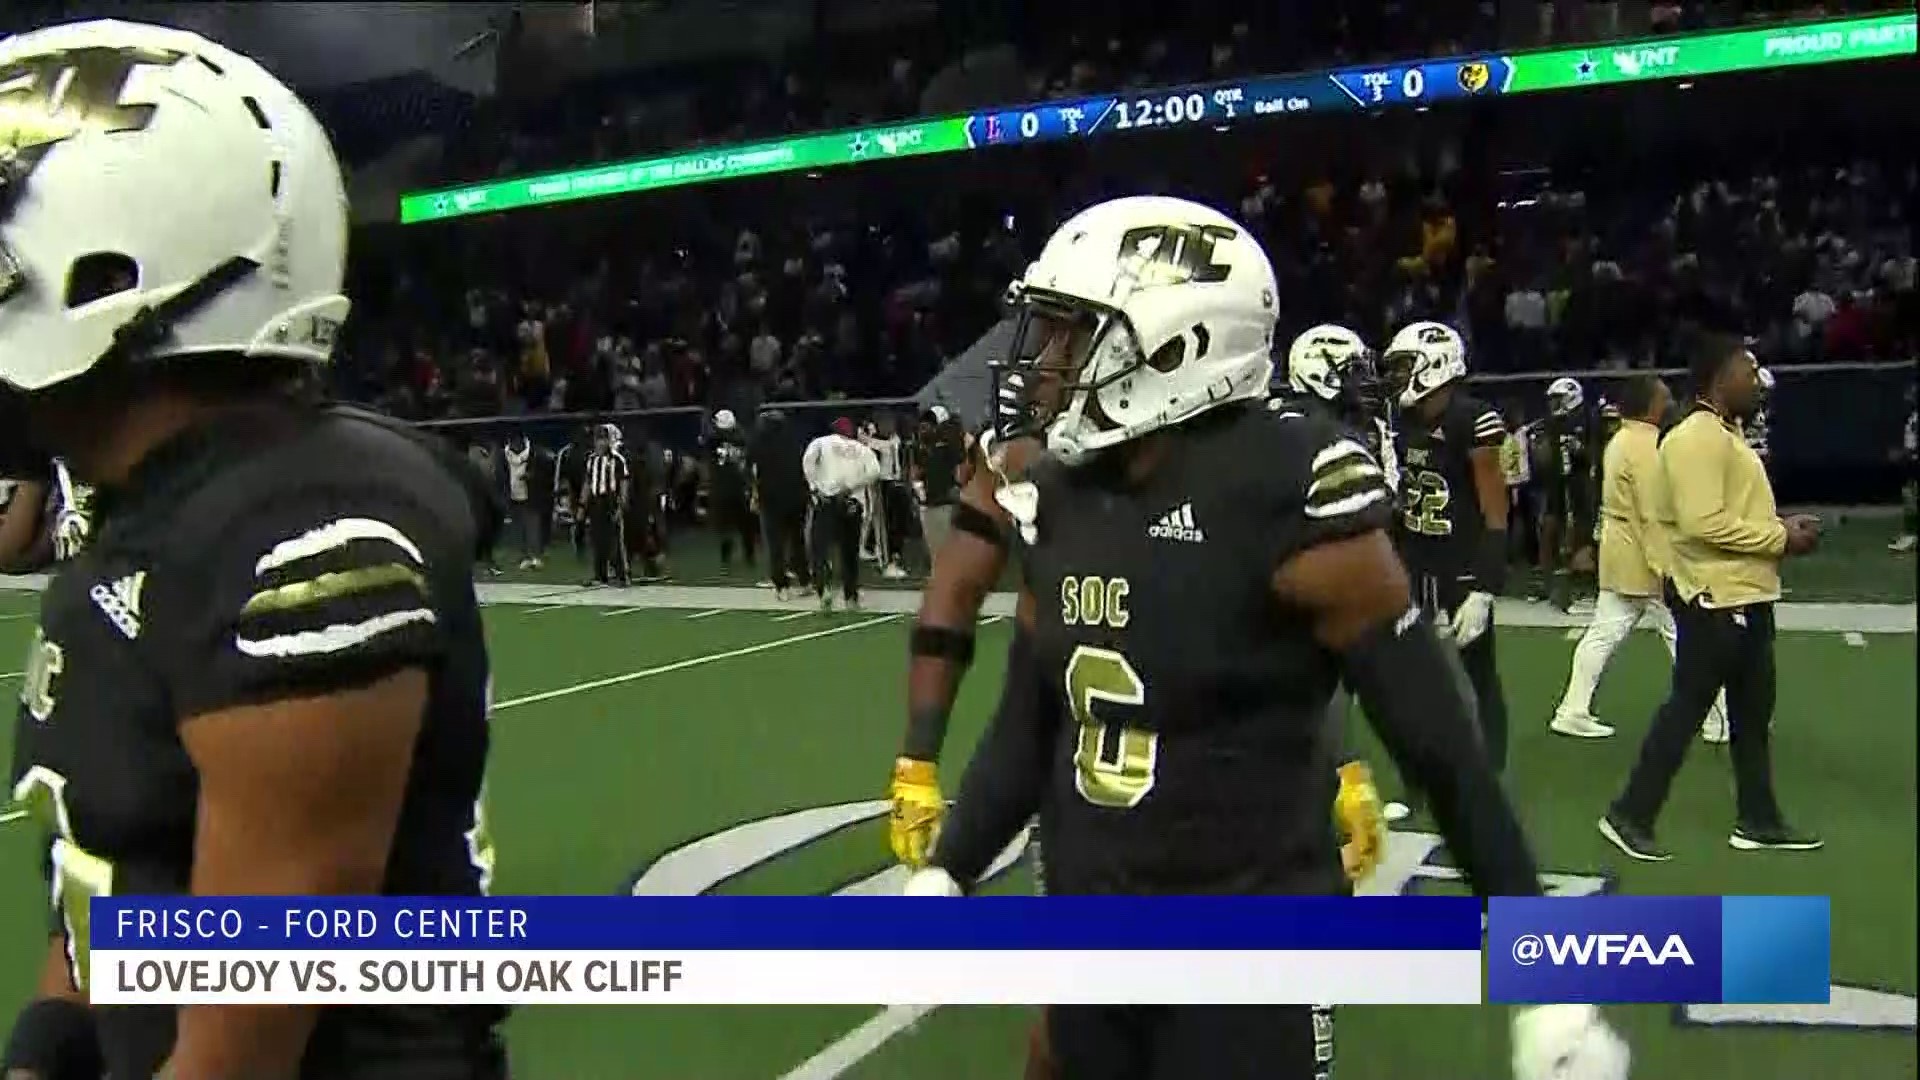 It was a historic day for the South Oak Cliff Golden Bears, who beat the Lovejoy Leopards to advance to the state semifinals.